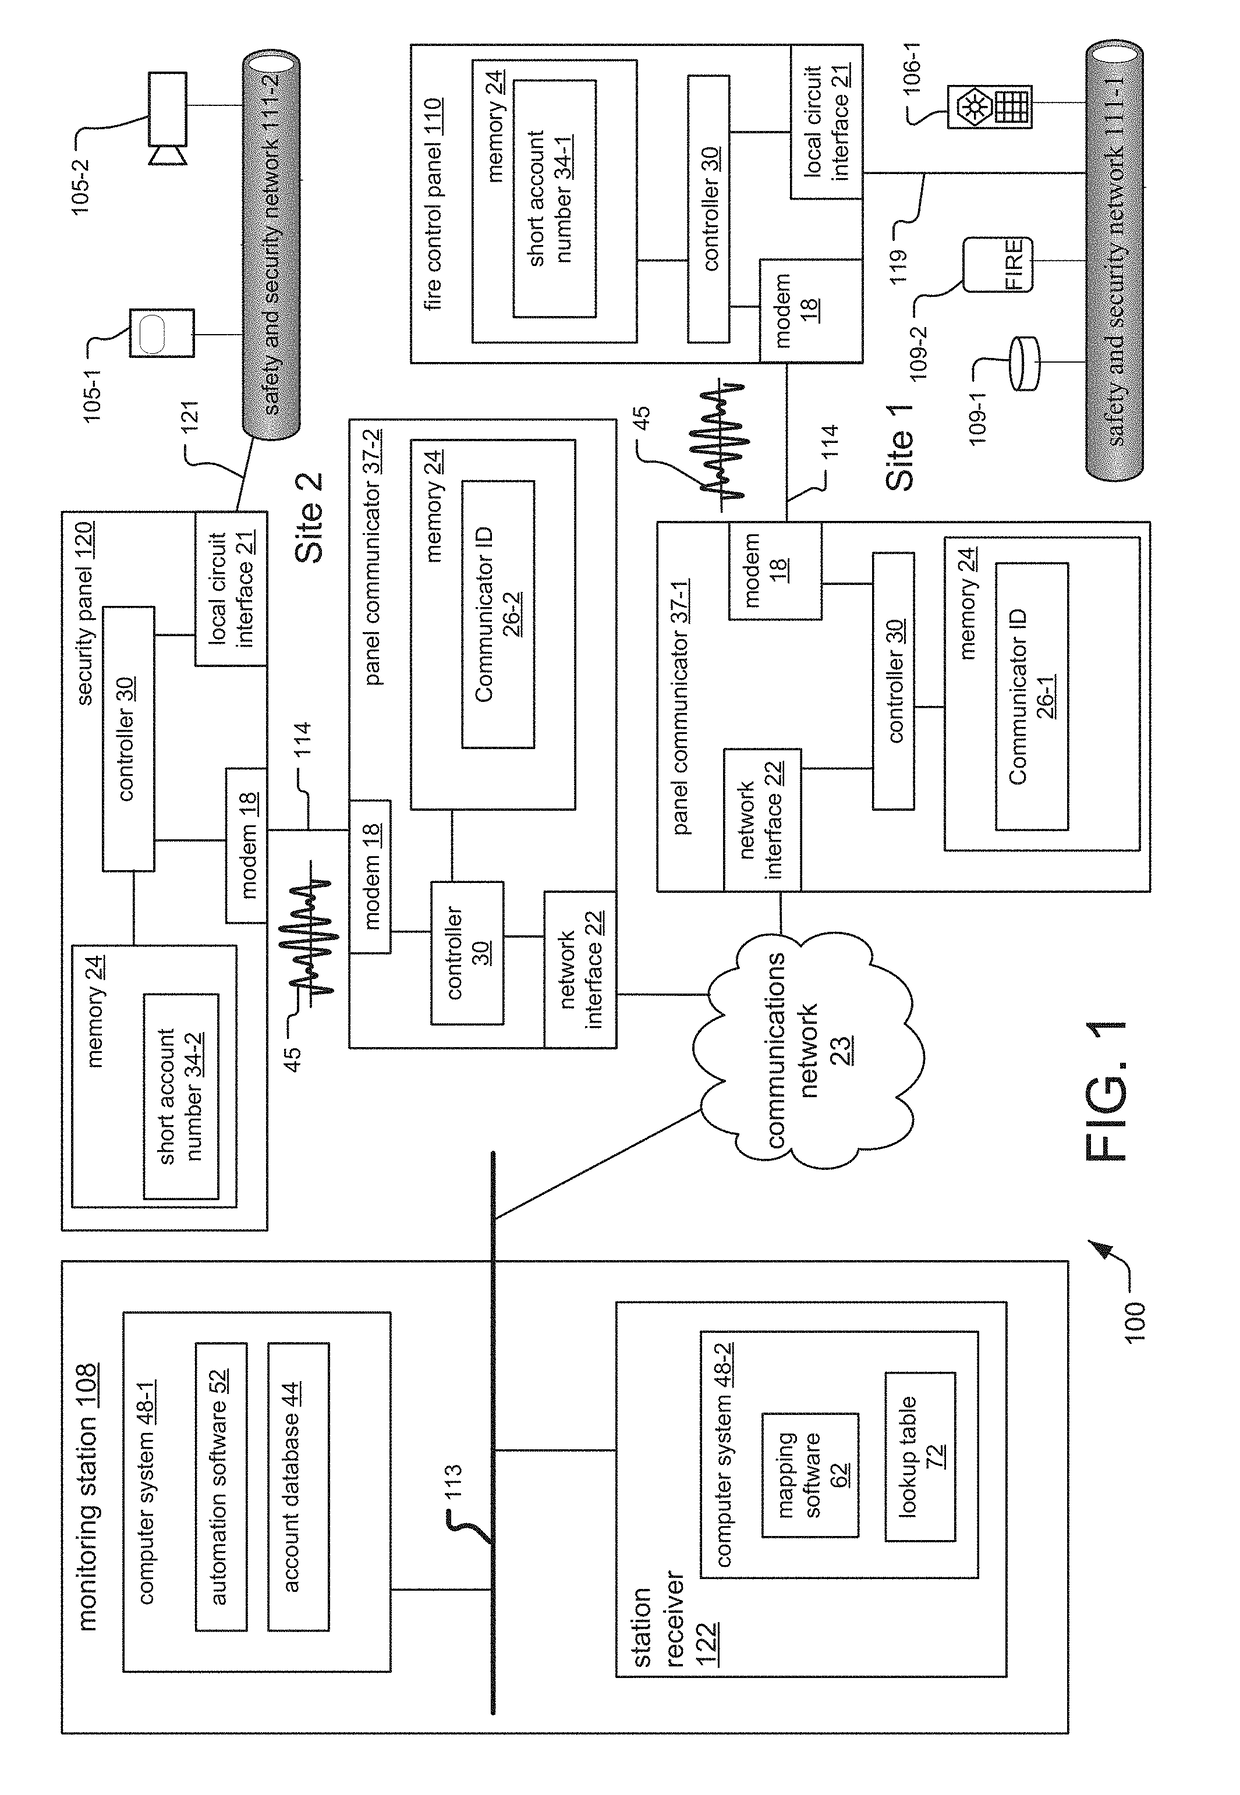 Account Number Substitution for Dial Capture and IP Based Communicators